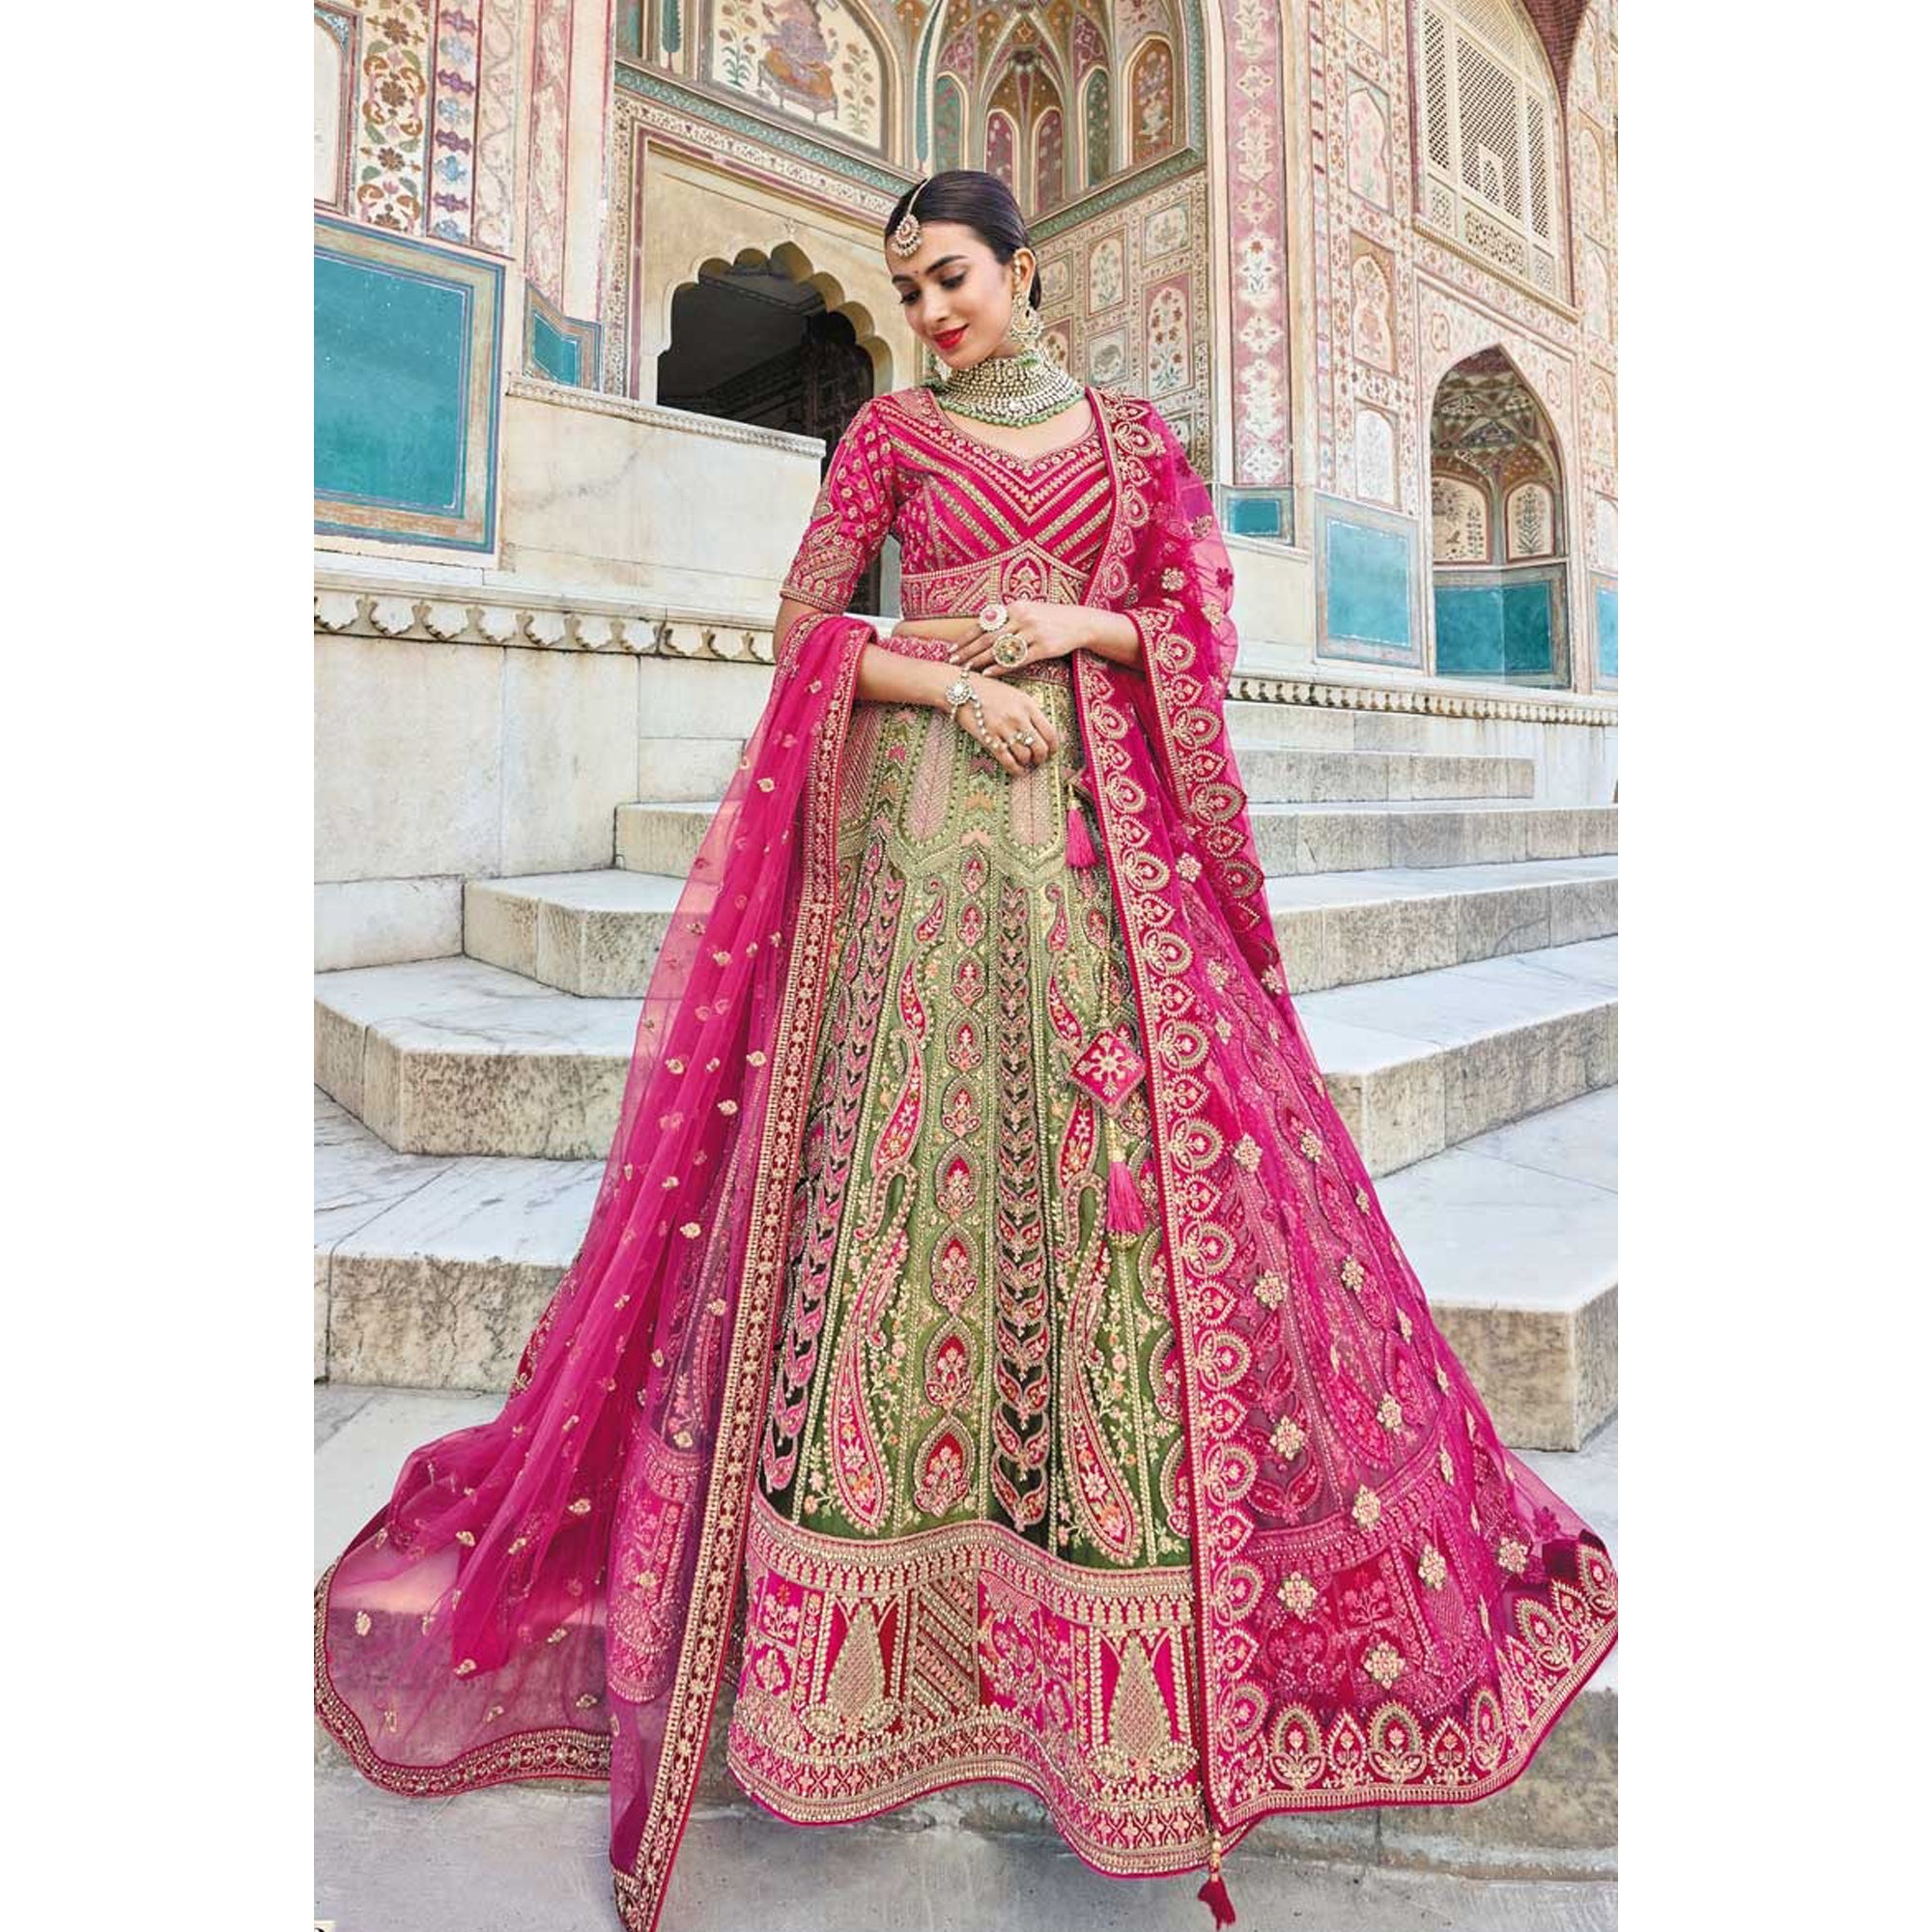 Stunning Silk Fabric Pink Color Embroidery Work Bridal Outfit Lehenga Choli